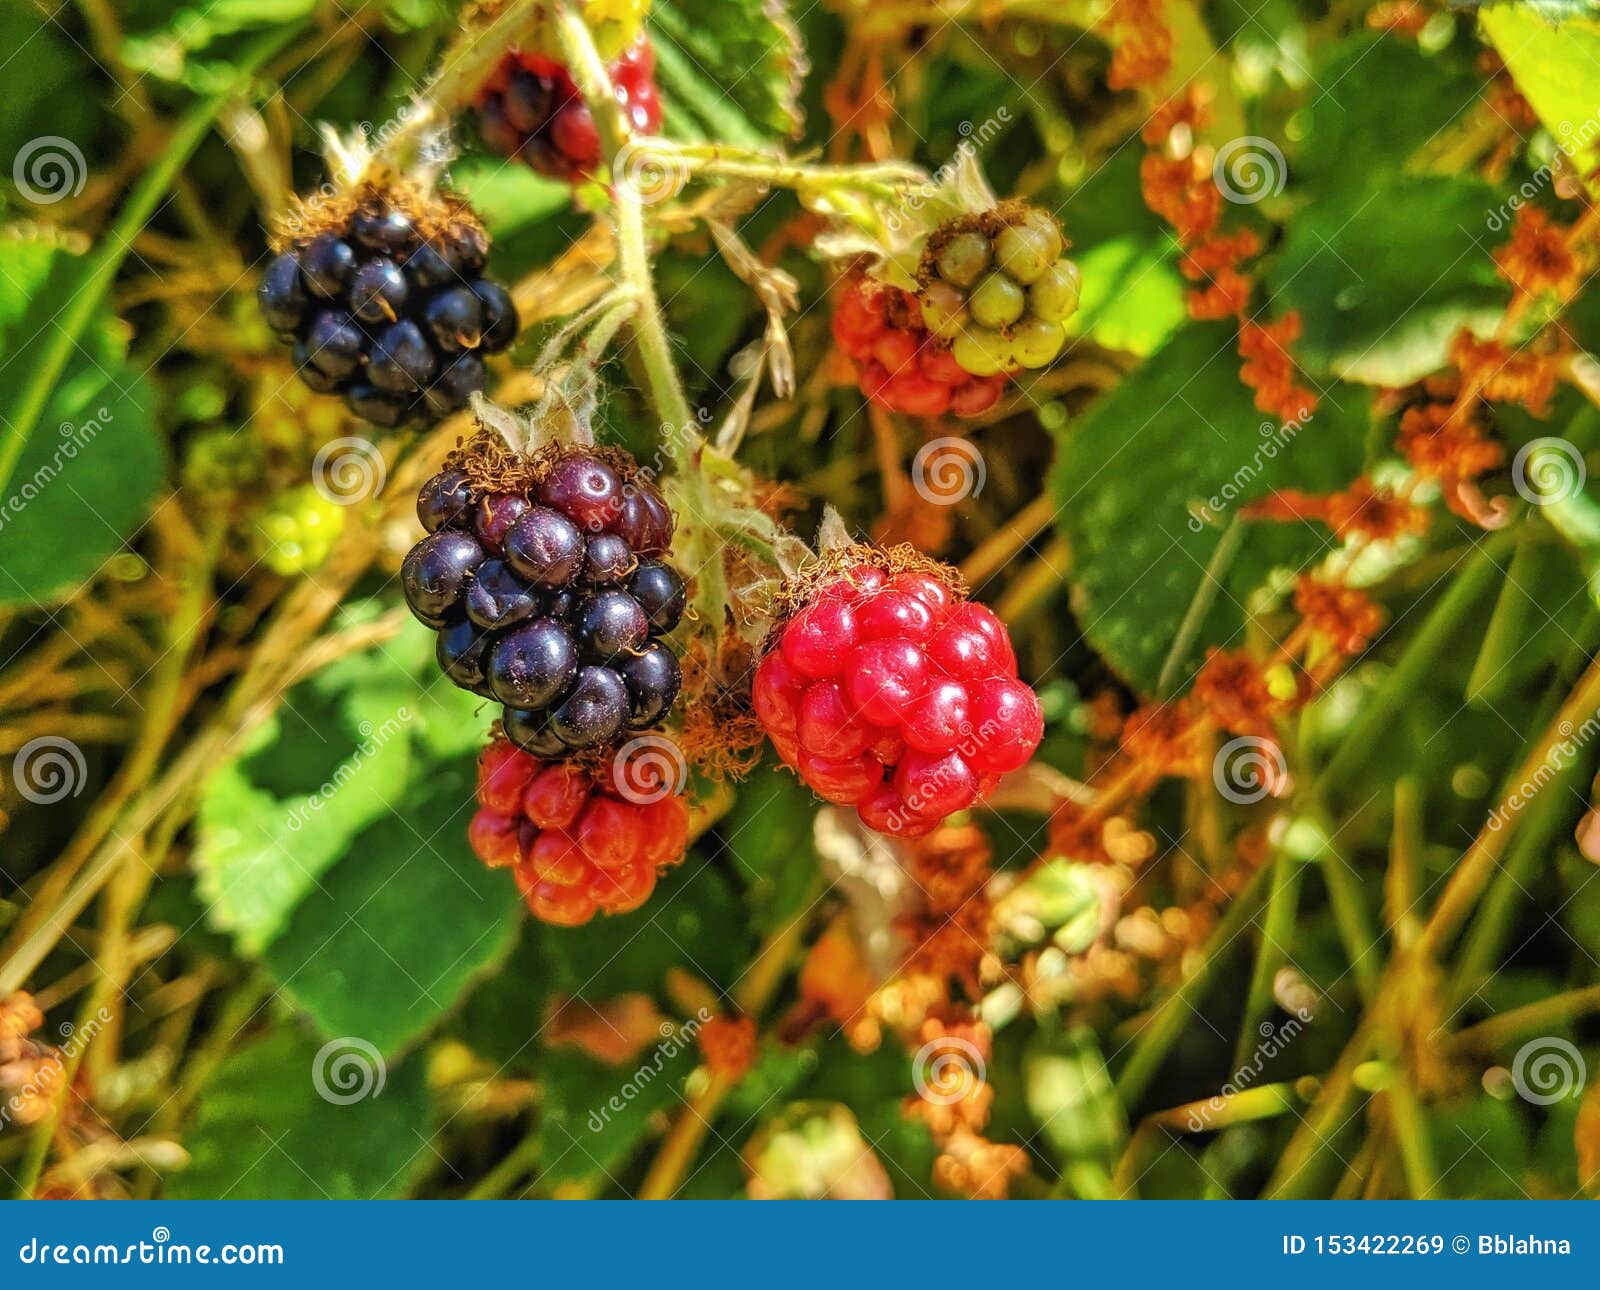 wild blackberries in stages of ripening. red and blackish. berries on stems in nature.